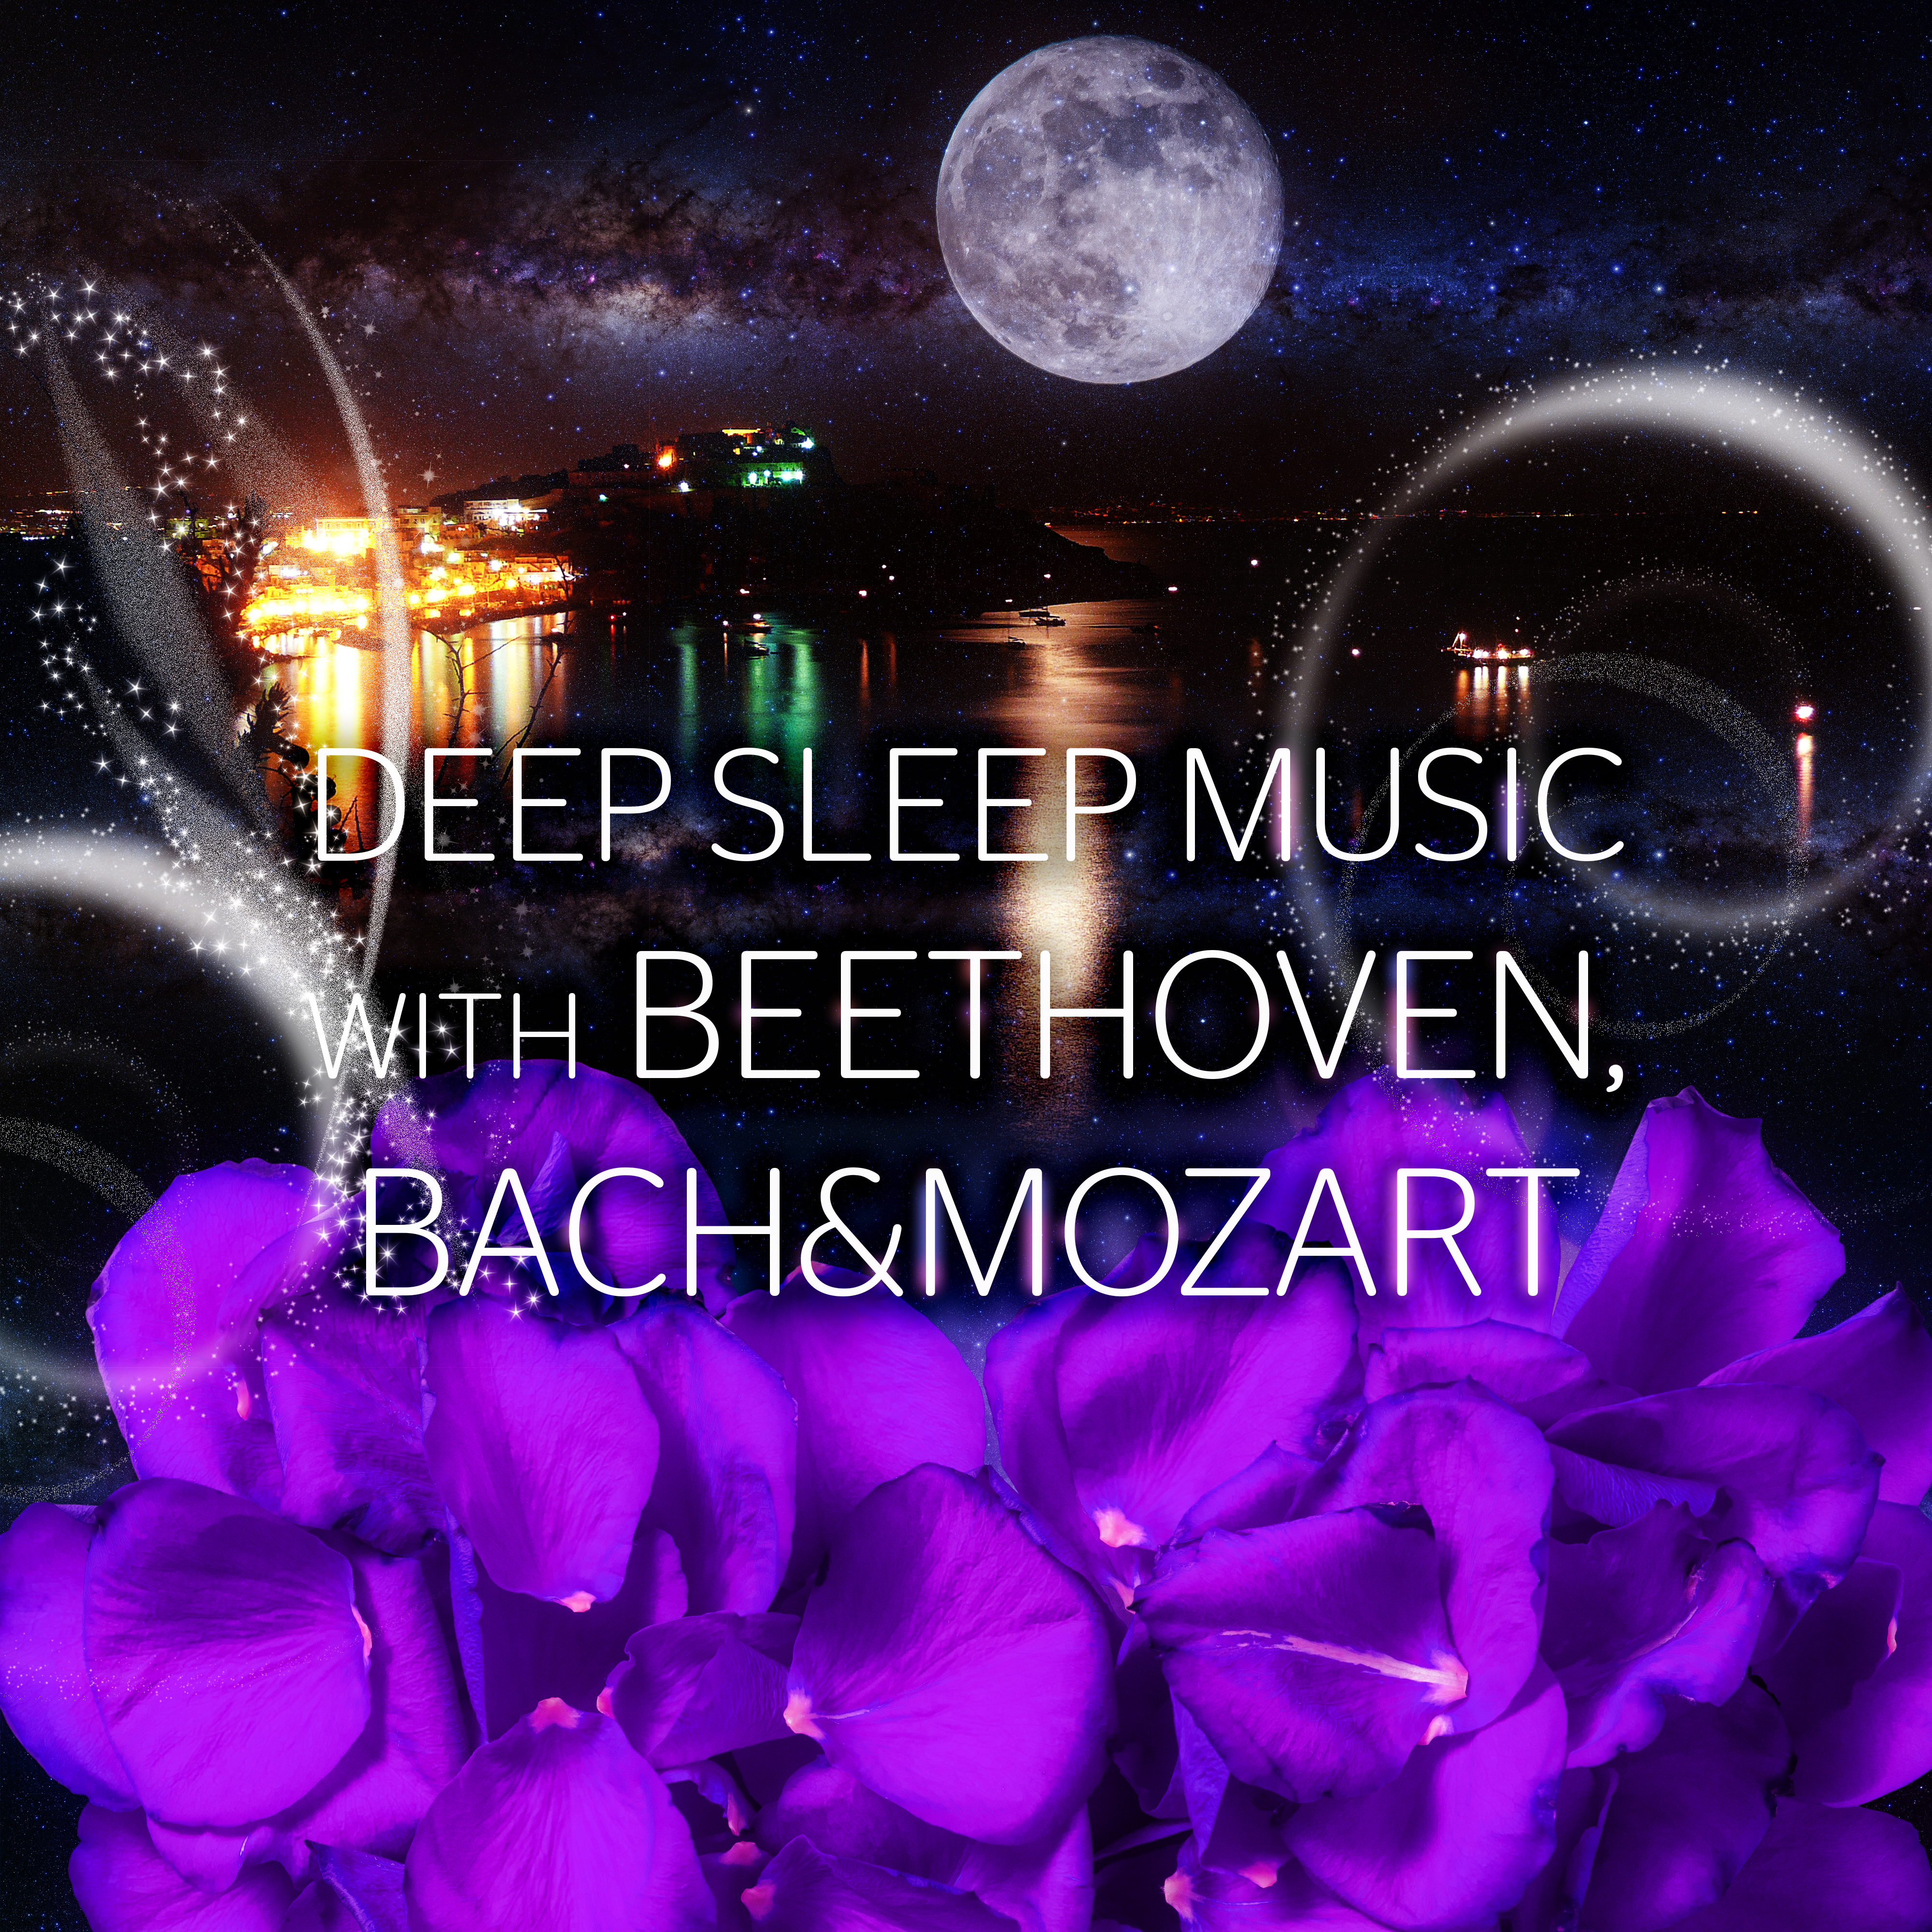 Deep Sleep Music with Beethoven, Bach, Mozart  Deep Sleep Music Therapy, Long Sleeping Songs to Help You Relax, Peaceful Music for Stress Relief